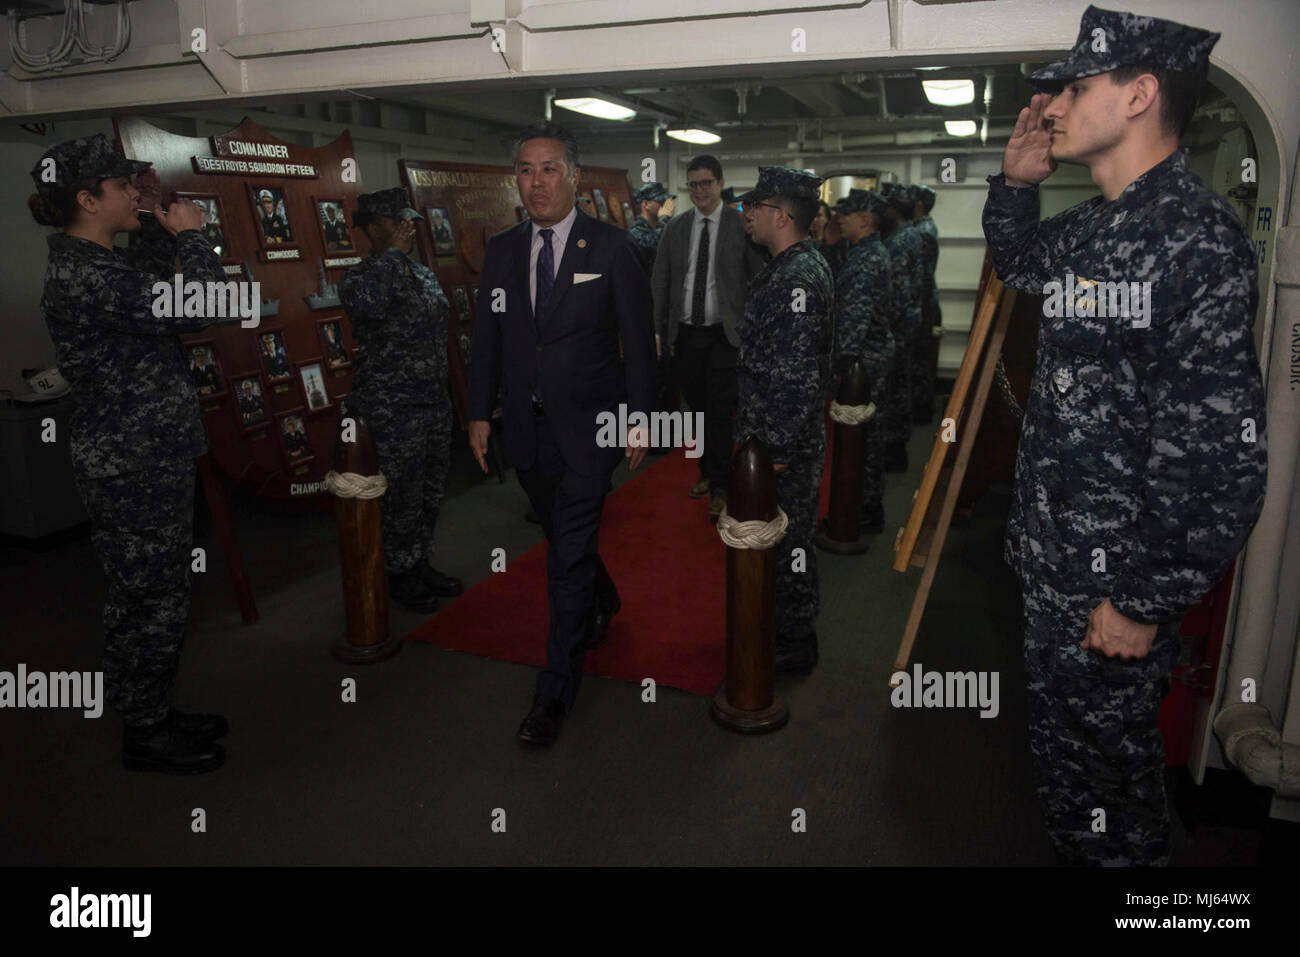 YOKOSUKA, Japan (April 4, 2018) U.S. Rep. Mark Takano, of California, and a member of the Committee on Veterans’ Affairs, arrives for a scheduled tour aboard the Navy's forward-deployed aircraft carrier, USS Ronald Reagan (CVN 76). During the tour, Takano visited the flight deck, a berthing and the machinery repair shop. Ronald Reagan, the flagship of Carrier Strike Group 5, provides a combat-ready force that protects and defends the collective maritime interests of its allies and partners in the Indo-Pacific region. (U.S. Navy Image collection celebrating the bravery dedication commitment and Stock Photo